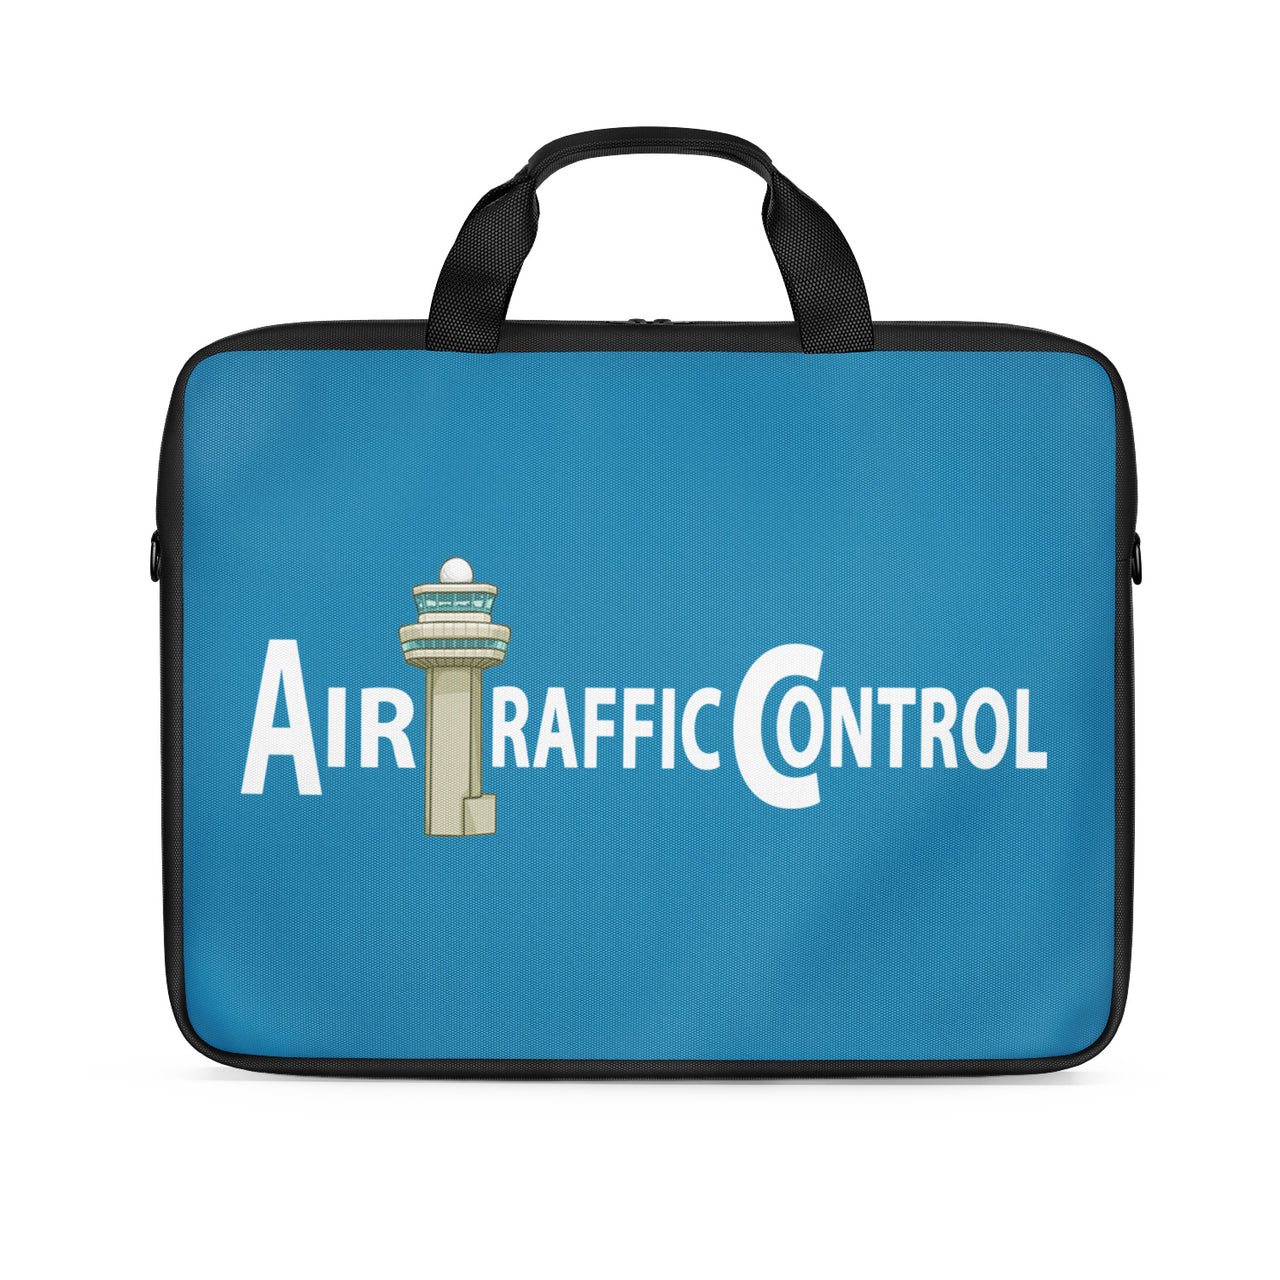 Air Traffic Control Designed Laptop & Tablet Bags